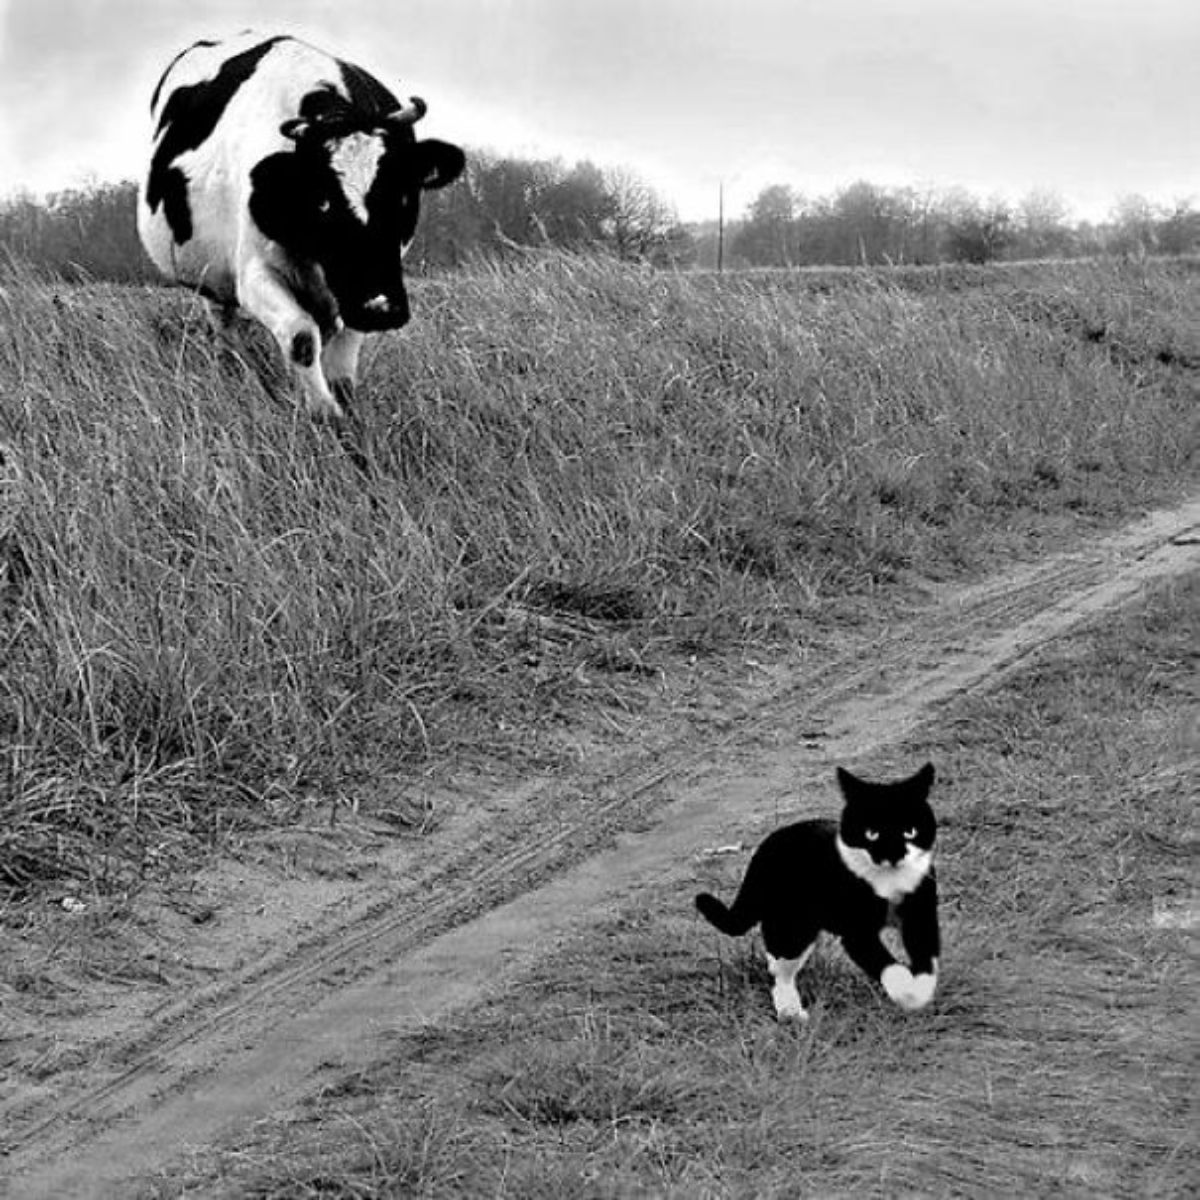 black and white cow chasing a black and white cat on a road